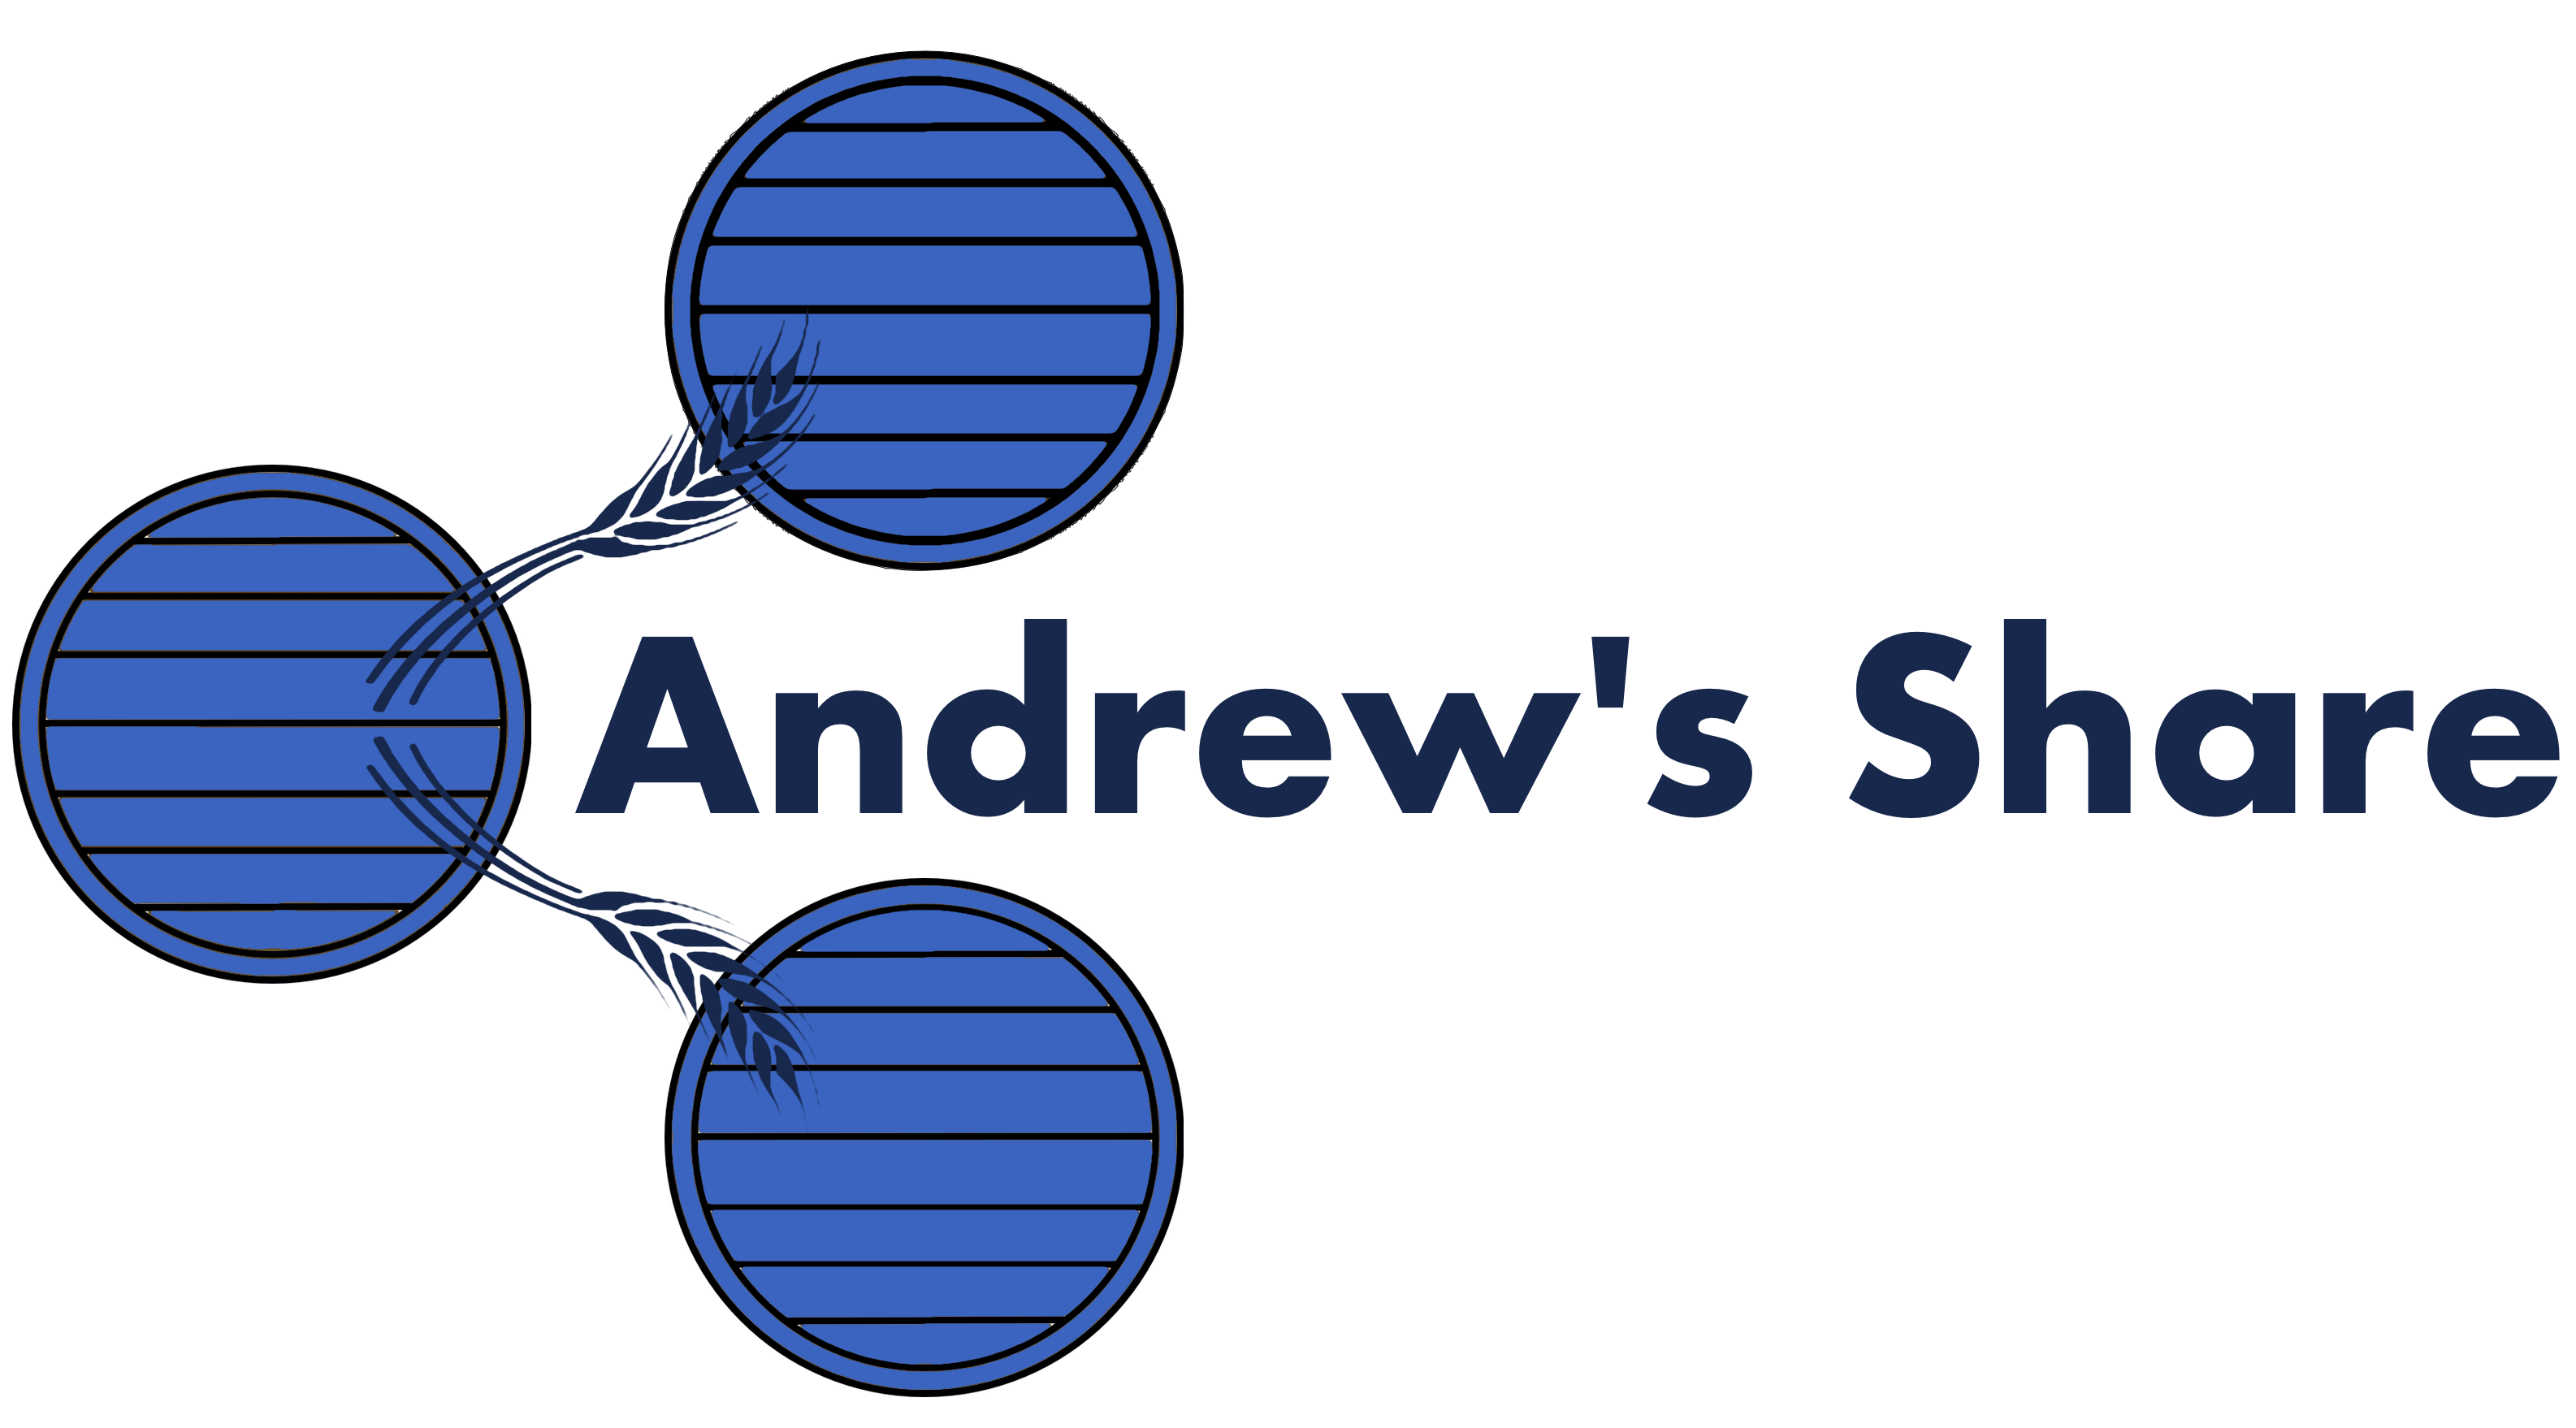 Andrew's Share